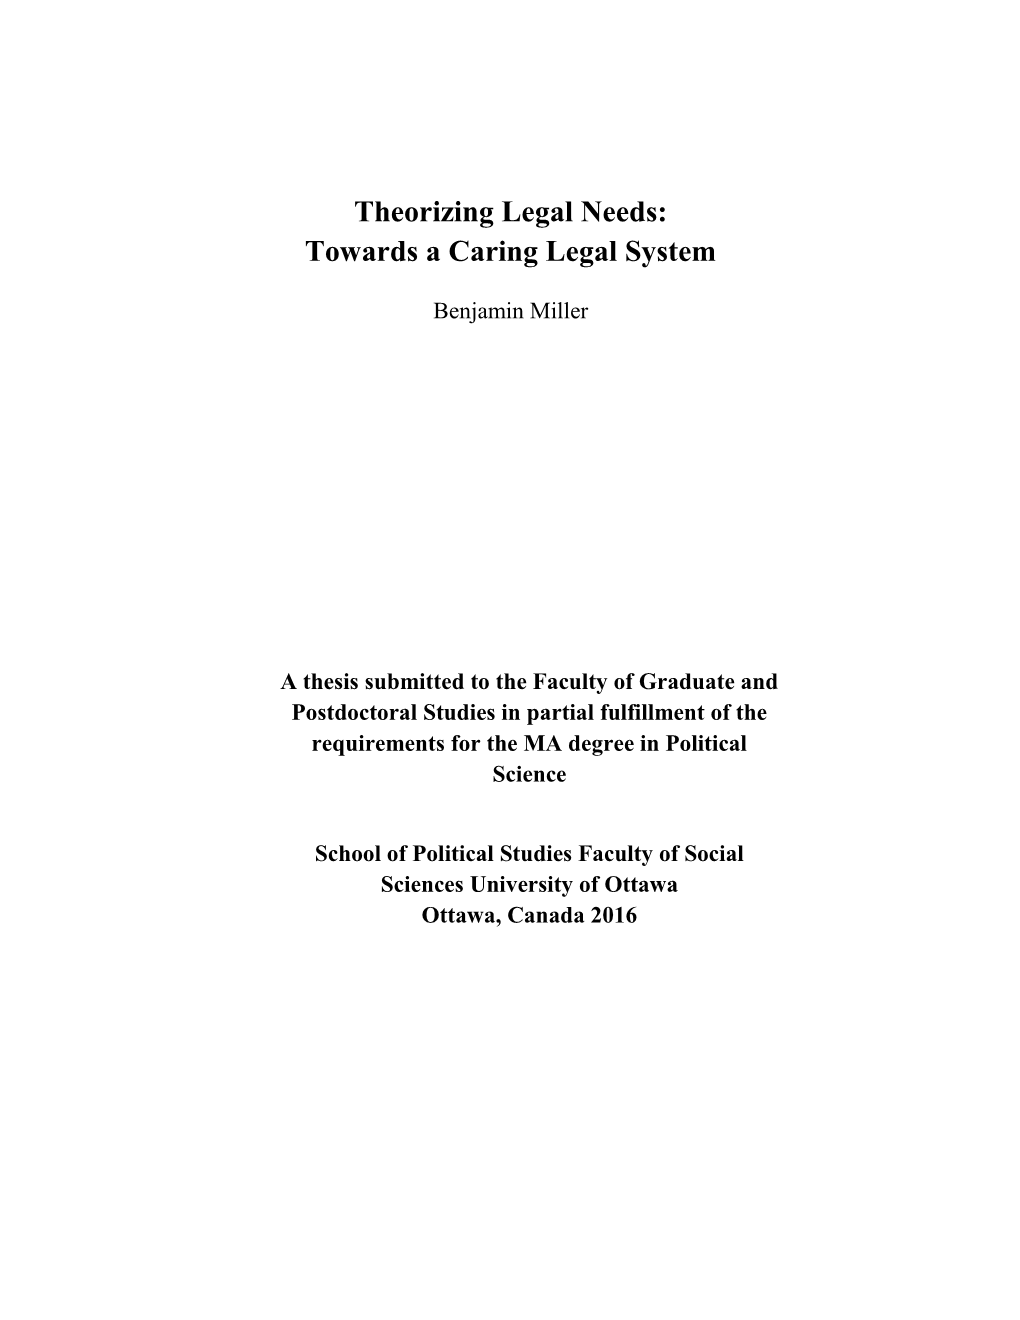 Theorizing Legal Needs: Towards a Caring Legal System